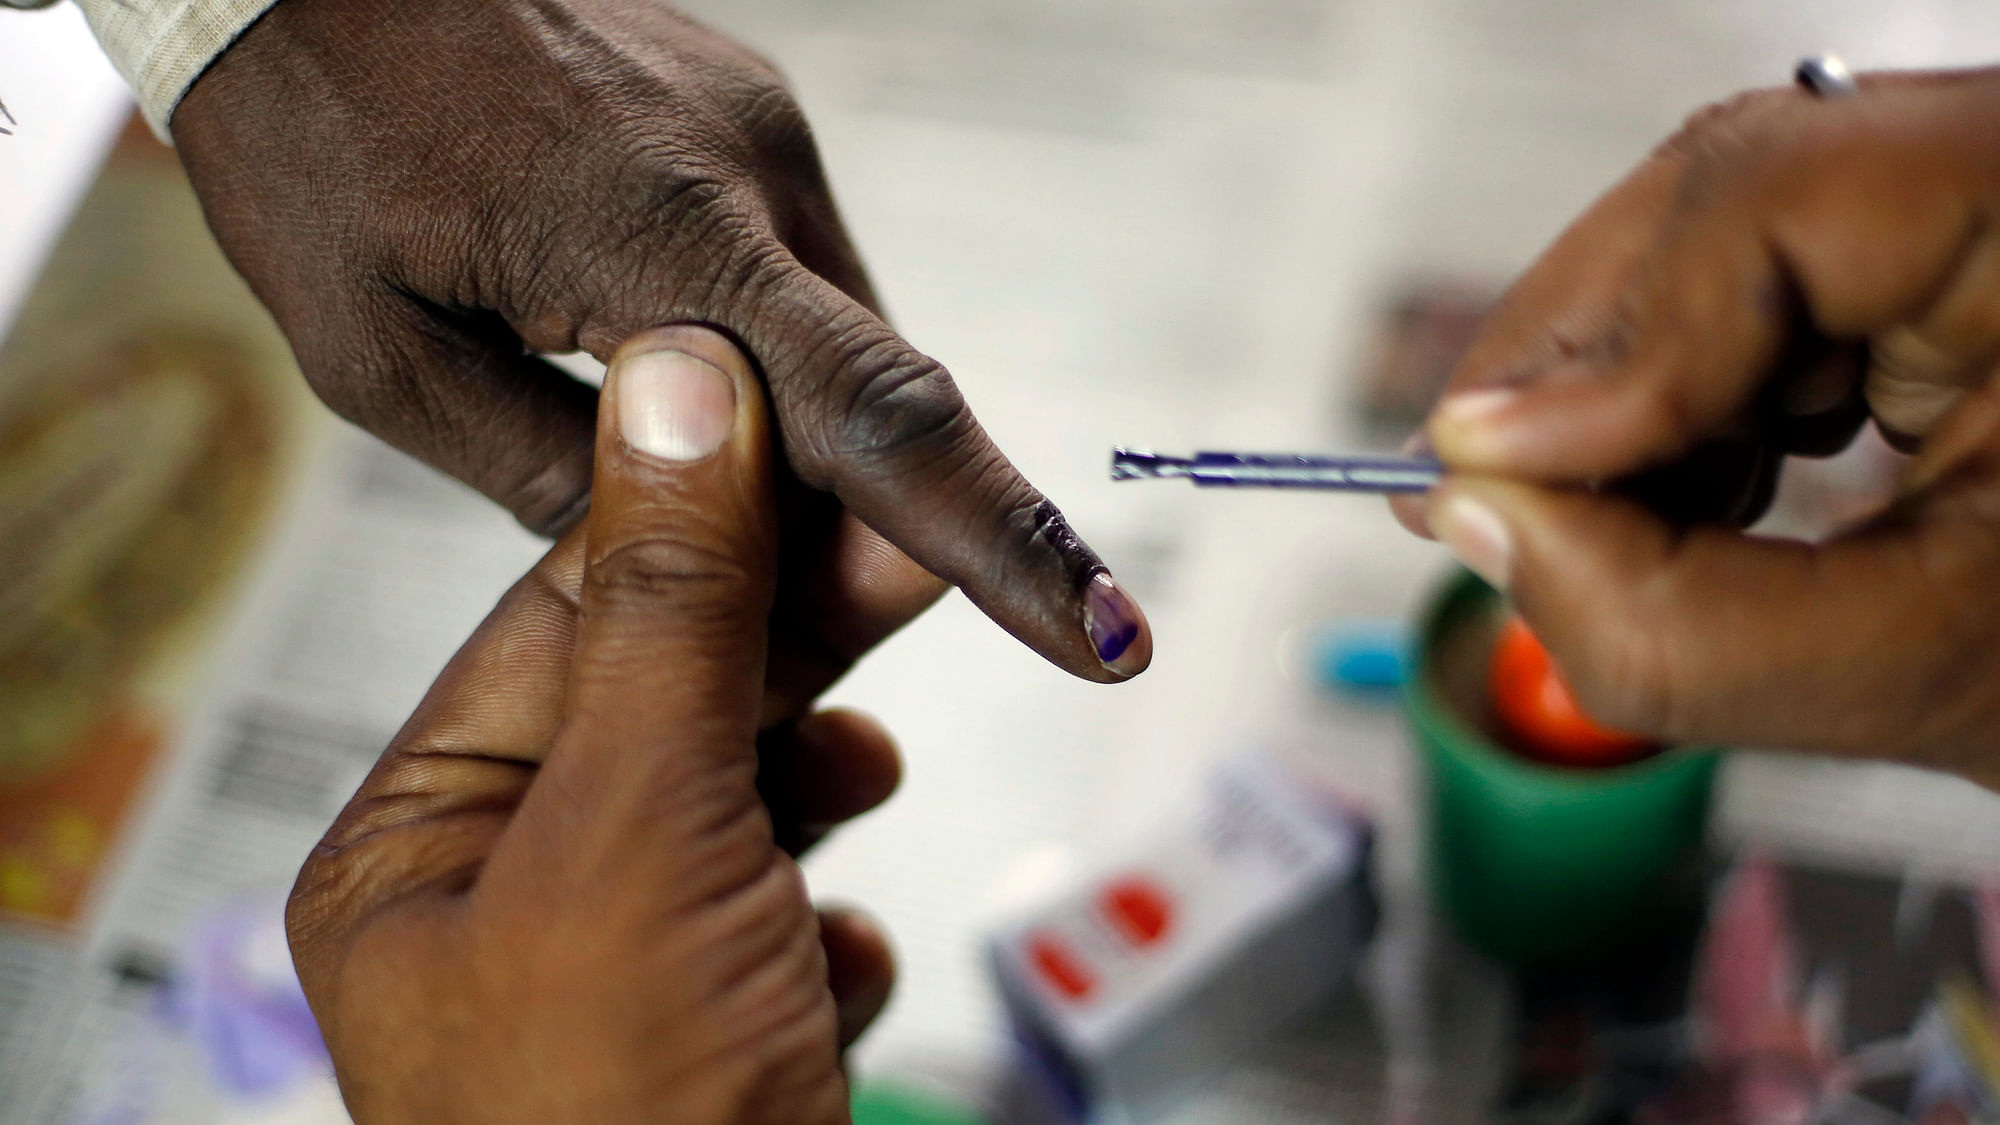 A man gets inked after casting vote. Photo used for representational purposes. (Photo: Reuters)